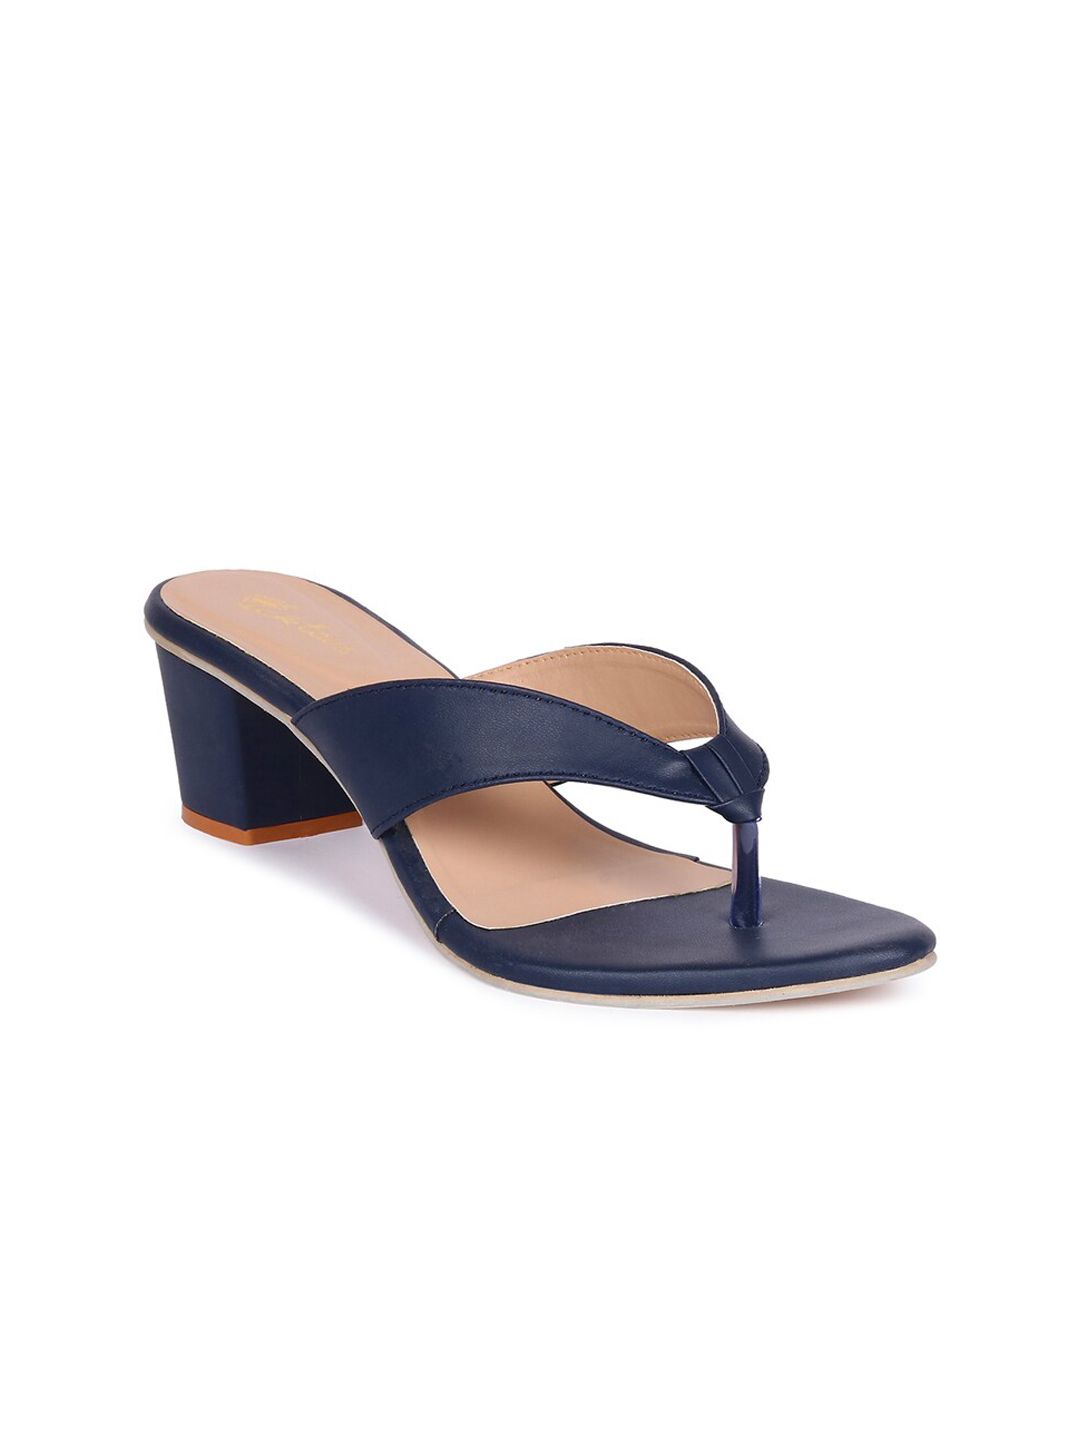 Picktoes Blue Block Sandals Price in India